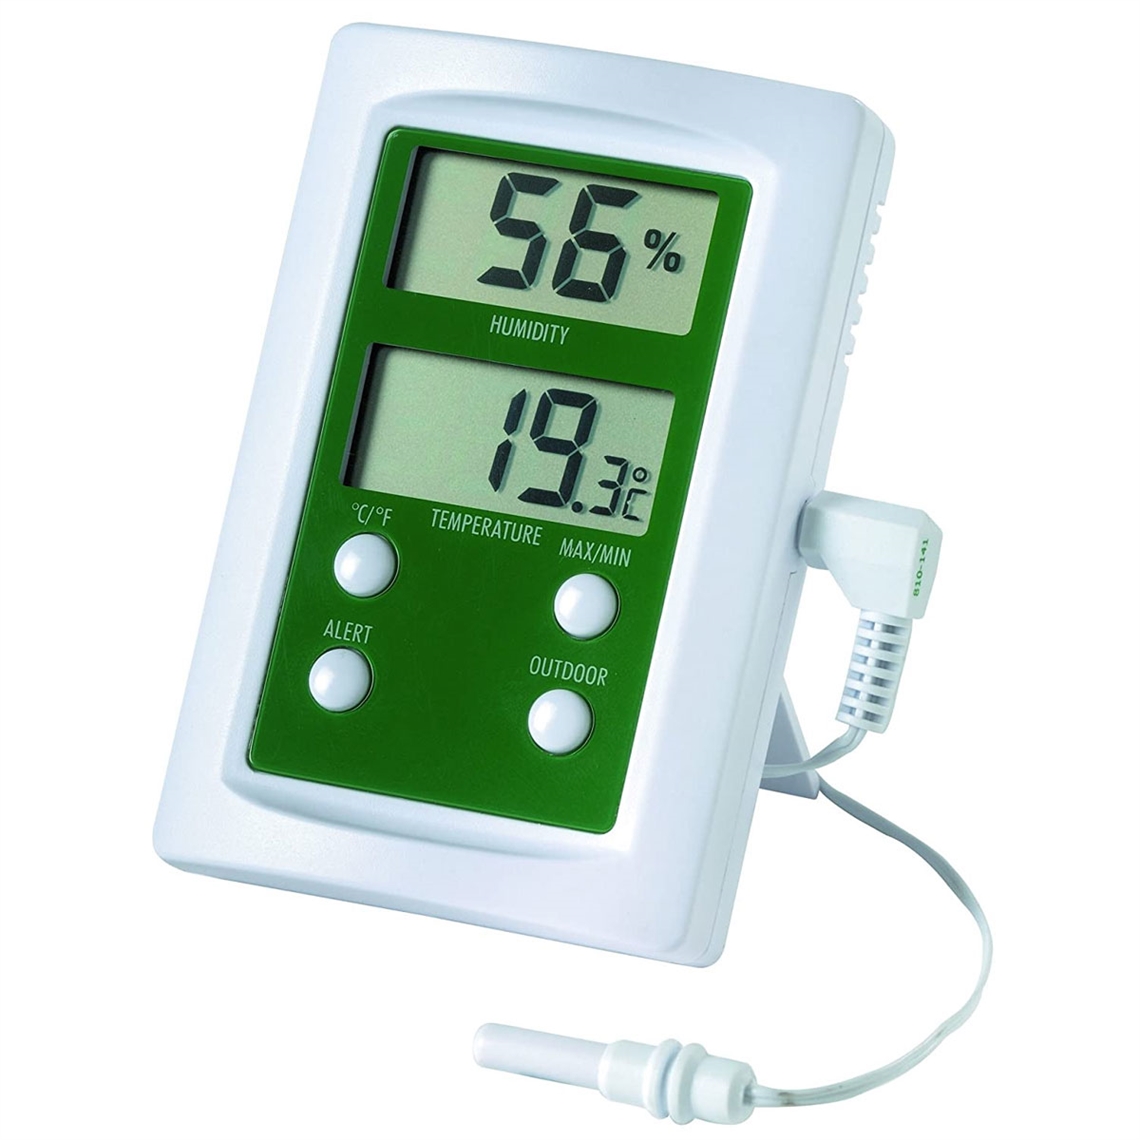 View more vacu vin from our Thermo Hygrometers range